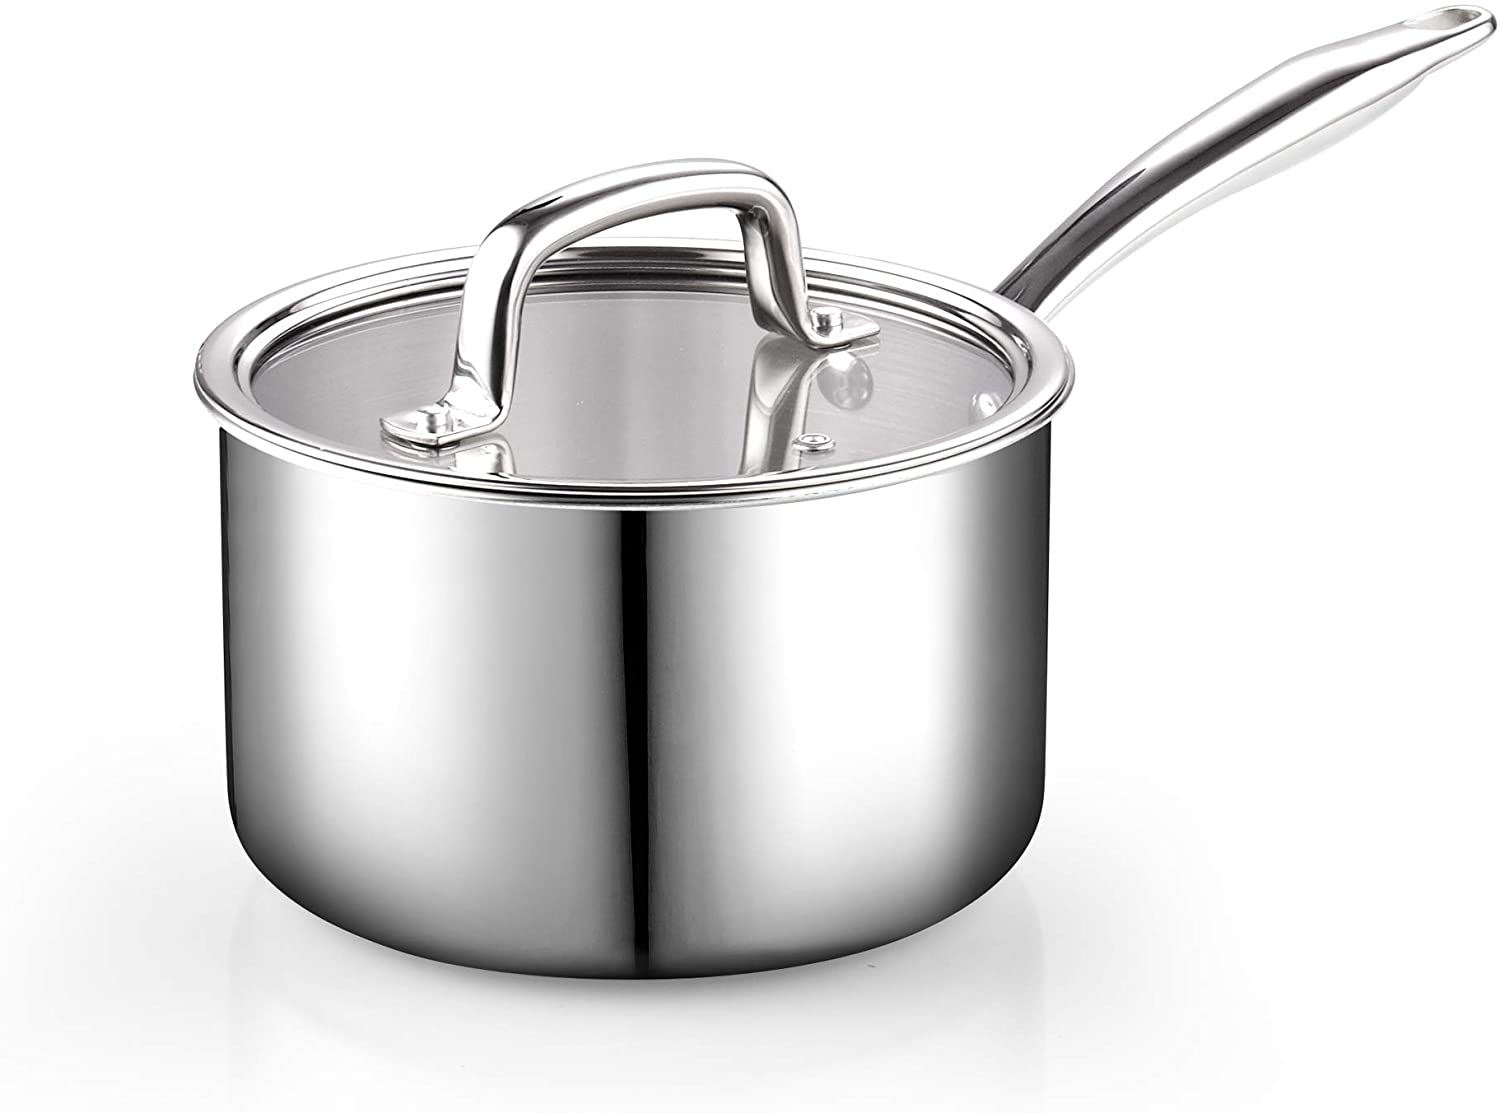 Tri-Ply Clad 3 Qt Stainless Steel Covered Sauce Pan - Glass Lid